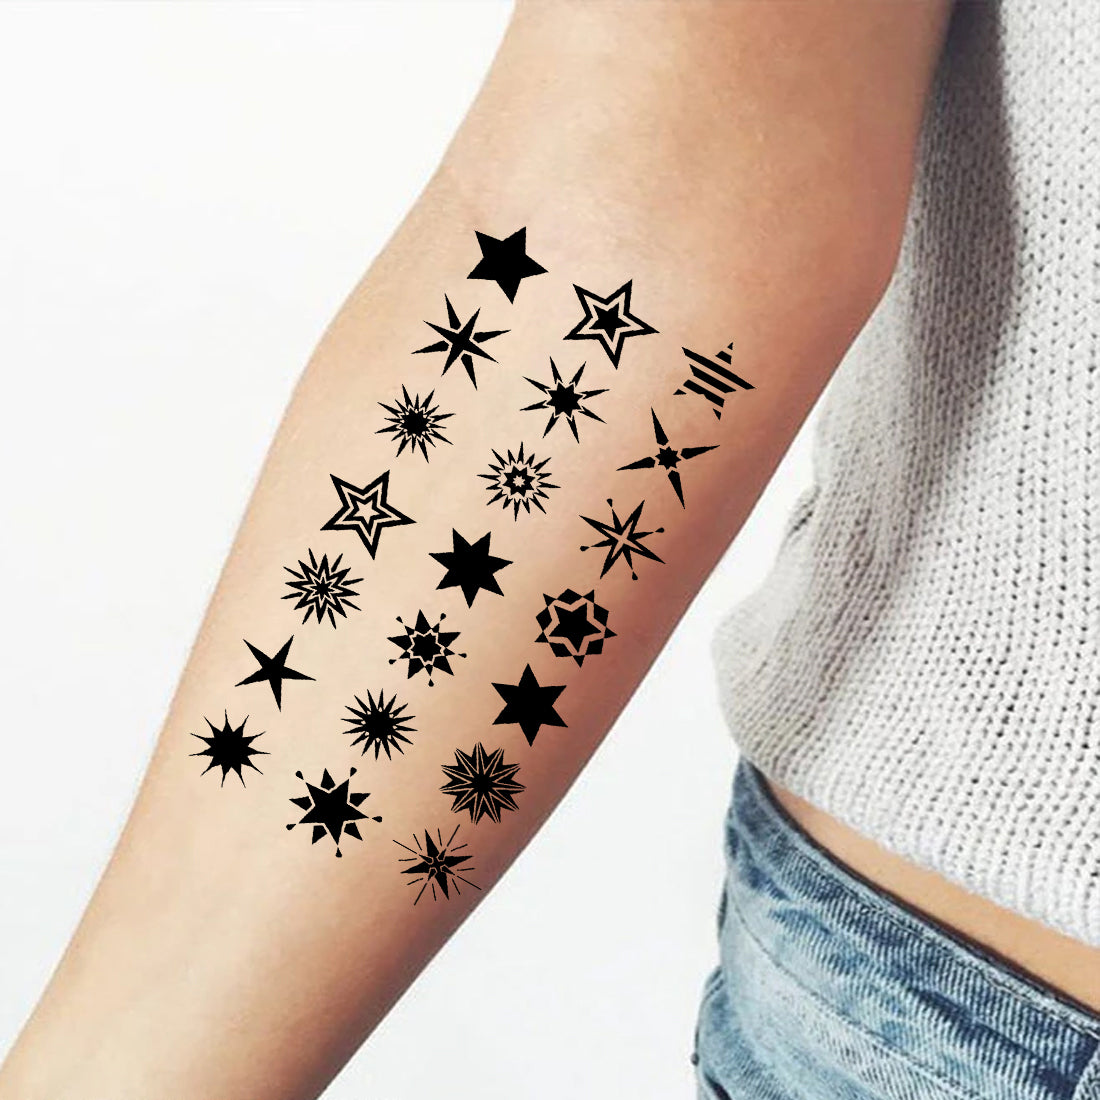 Star Tattoo Stock Photos and Images - 123RF